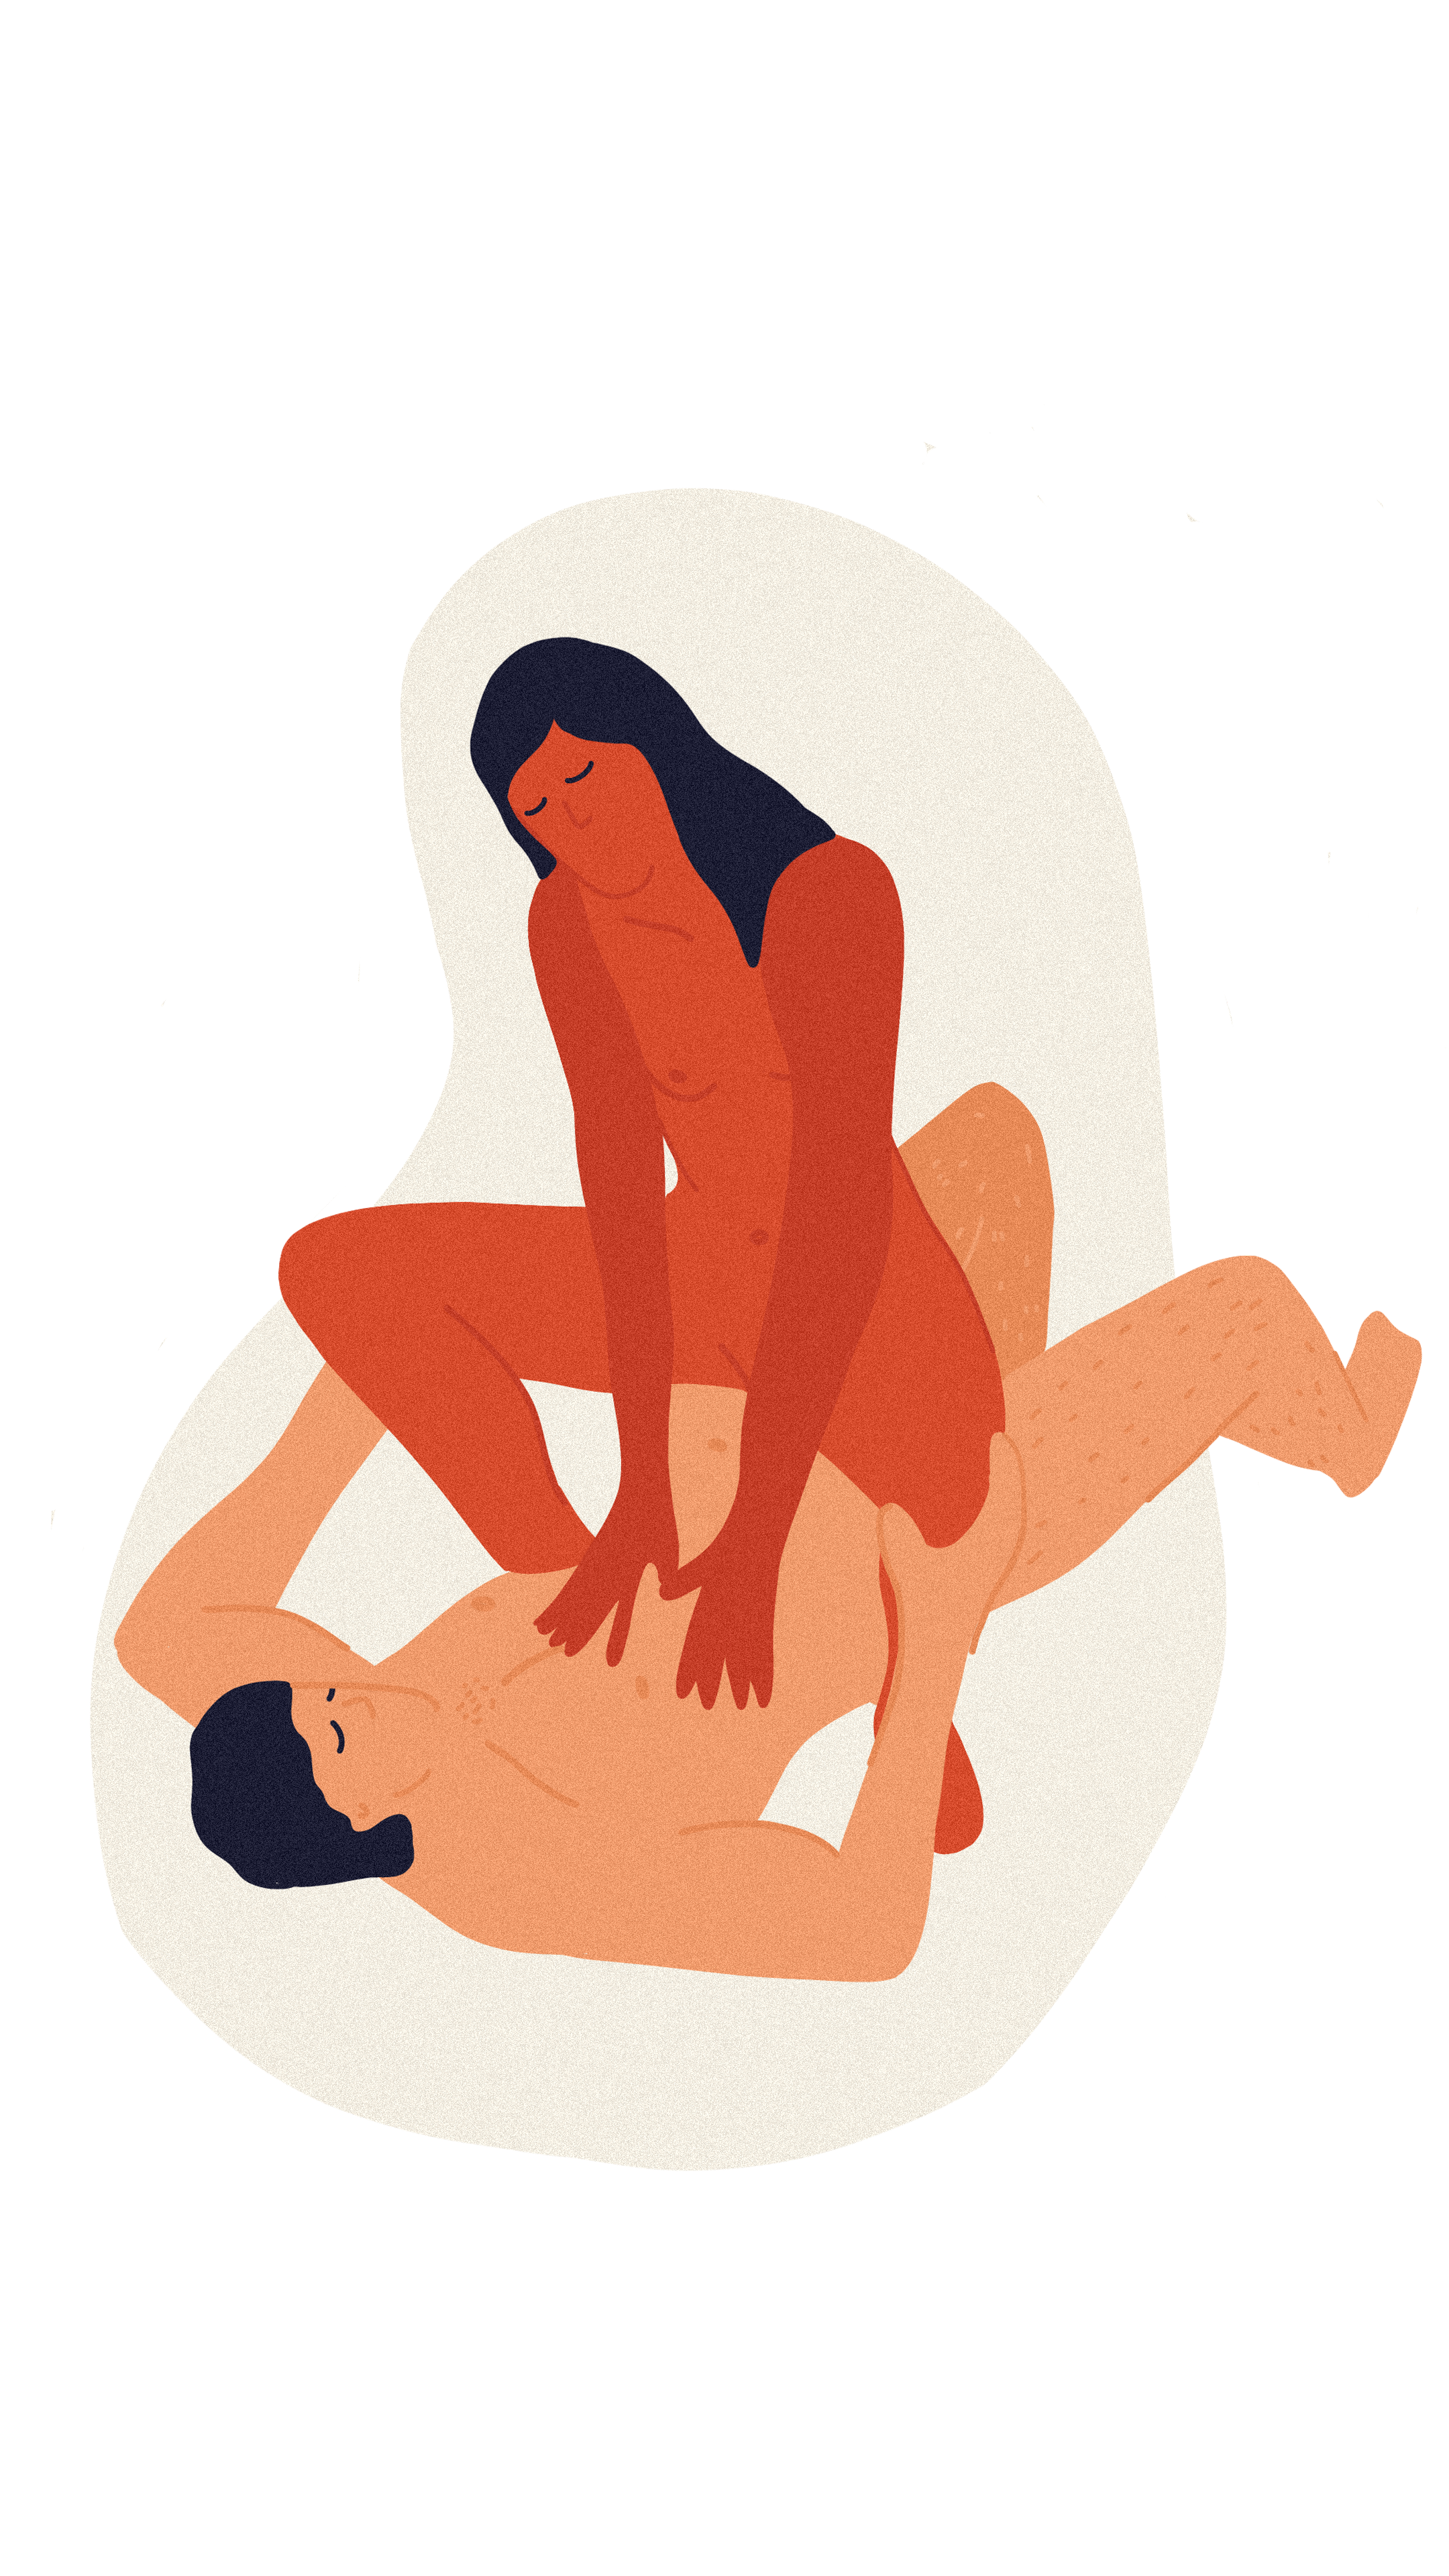 andrew ennes recommends best sex positions animated pic